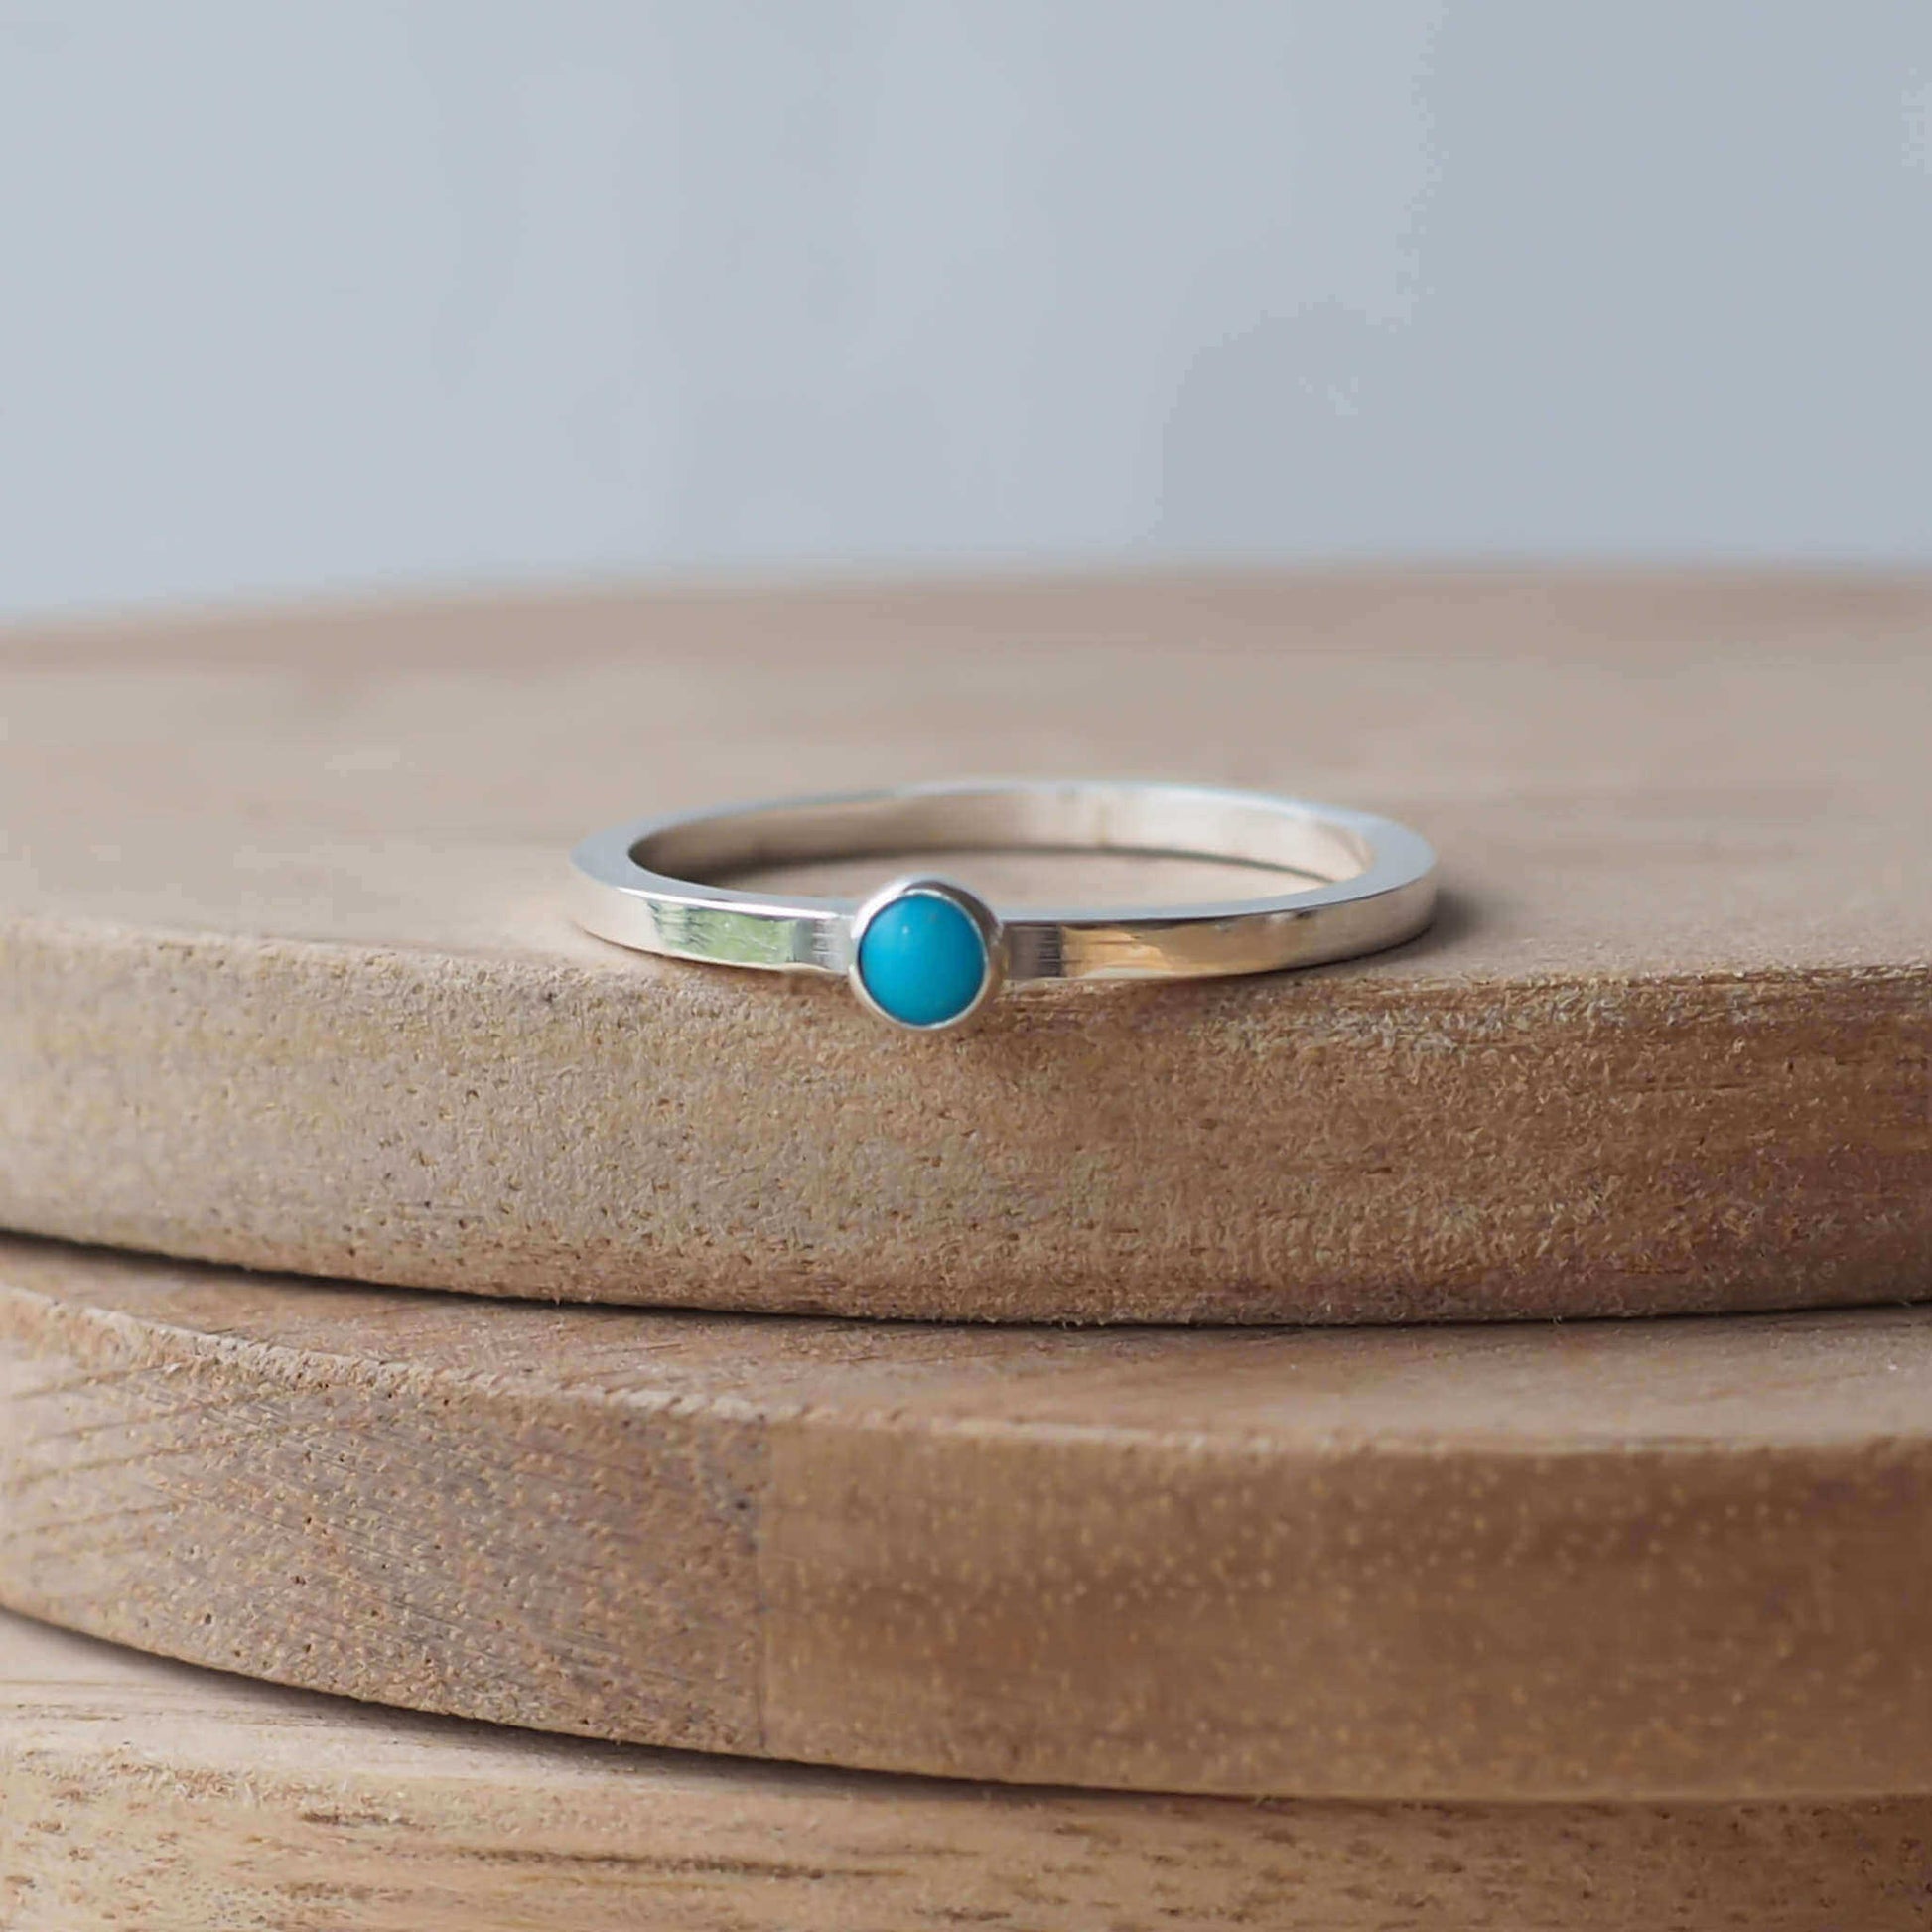 Turquoise and Sterling Silver Ring made from a small 3mm round turquoise gemstone set simply onto a modern band of square wire. Handmade to your ring size by maram jewellery in Scotland